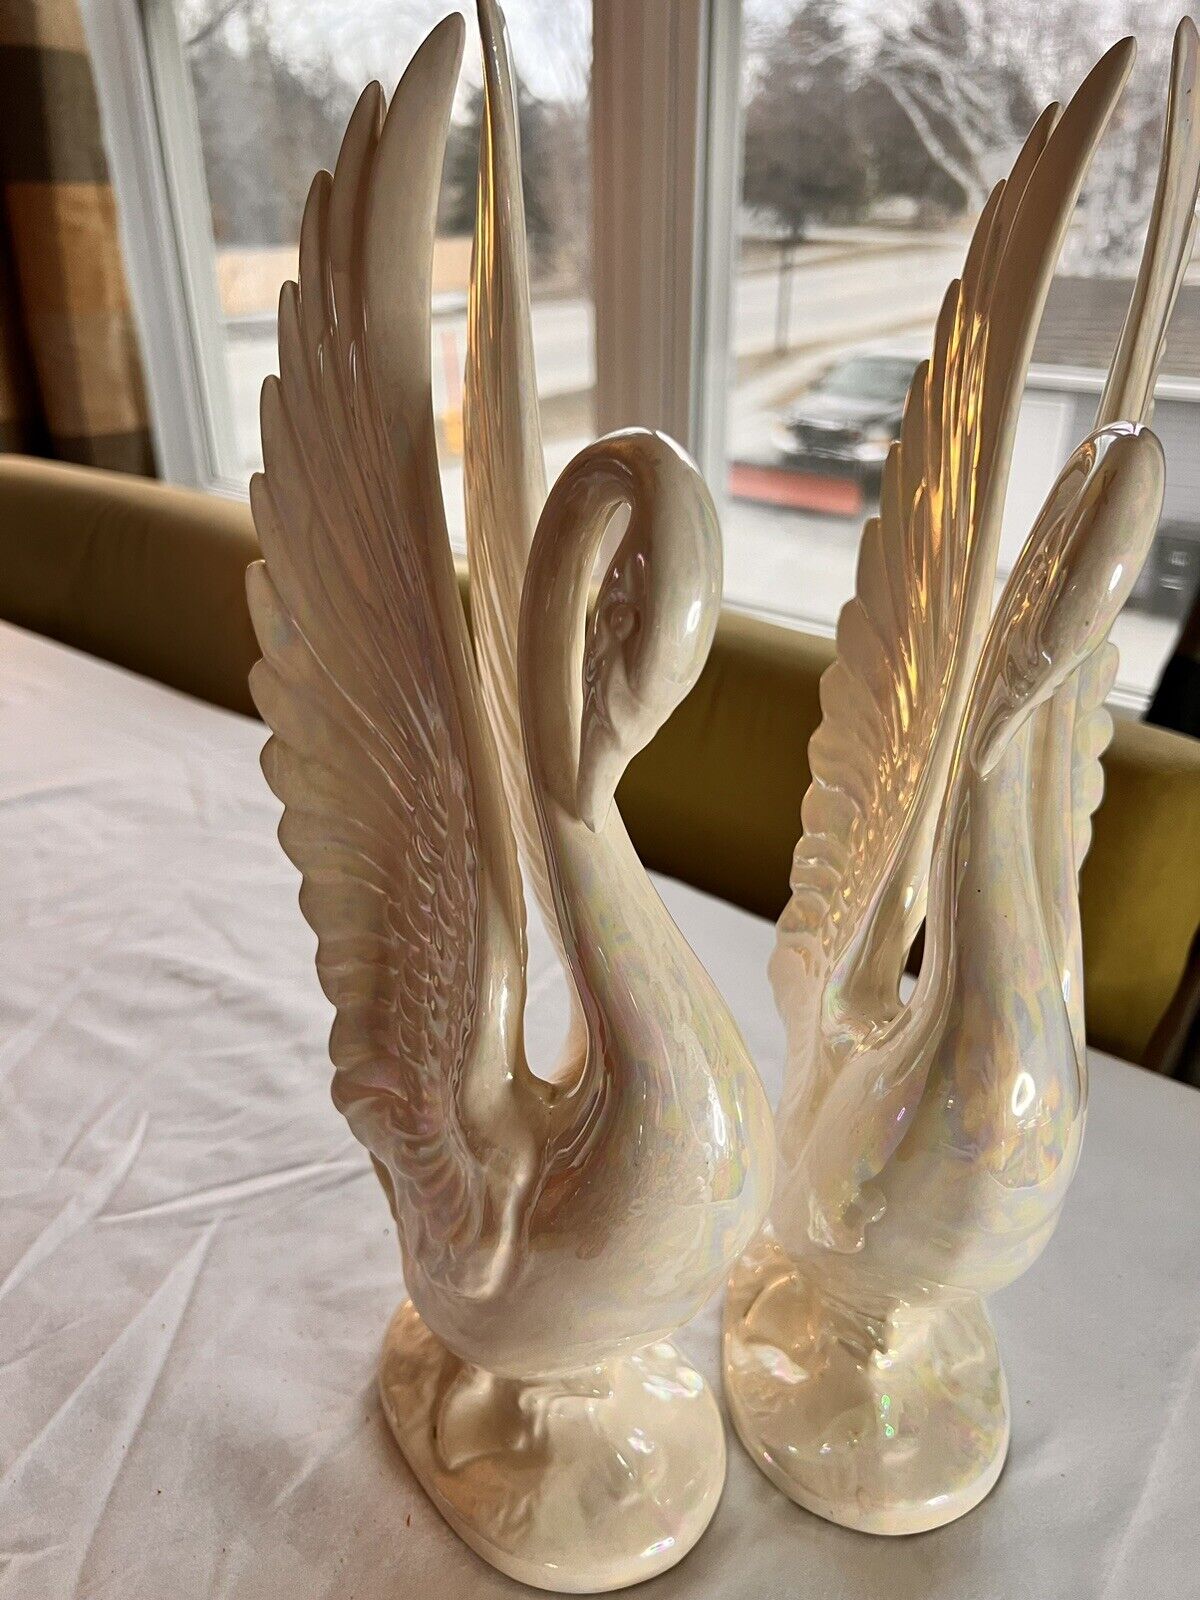 VTG Lg Pair of Pearl Iridescent Swans Decor 14” Tall Signed 1964 Art Deco Style